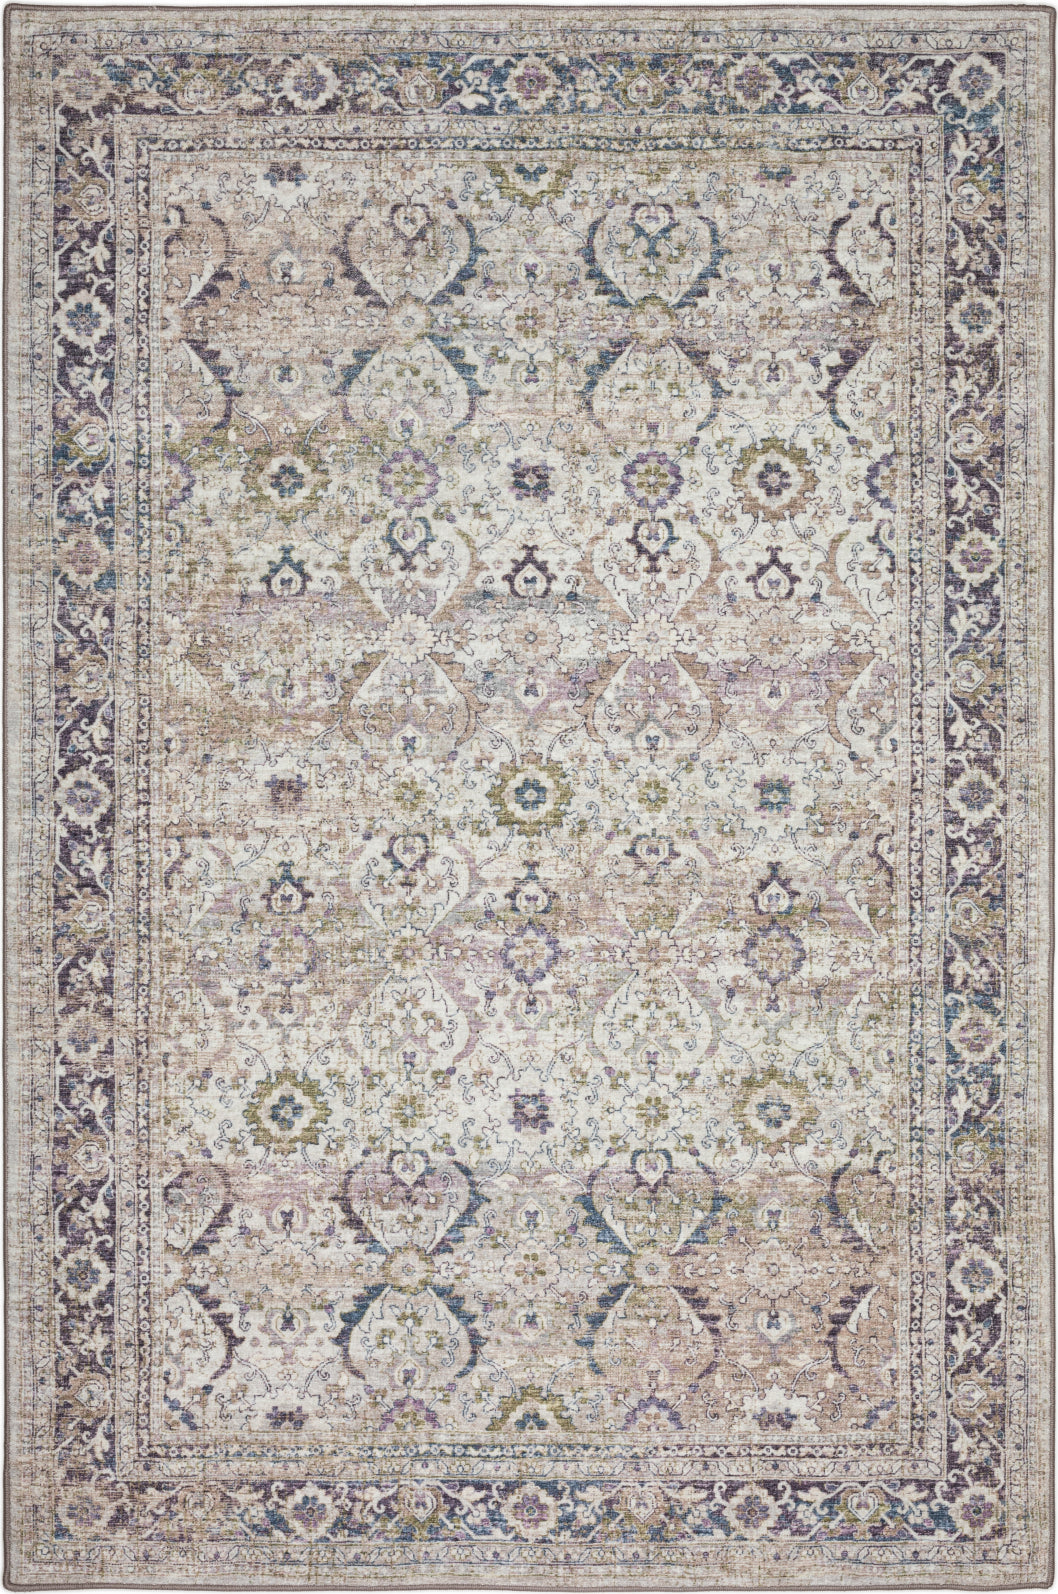 Dalyn Jericho JC1 Oyster Area Rug main image